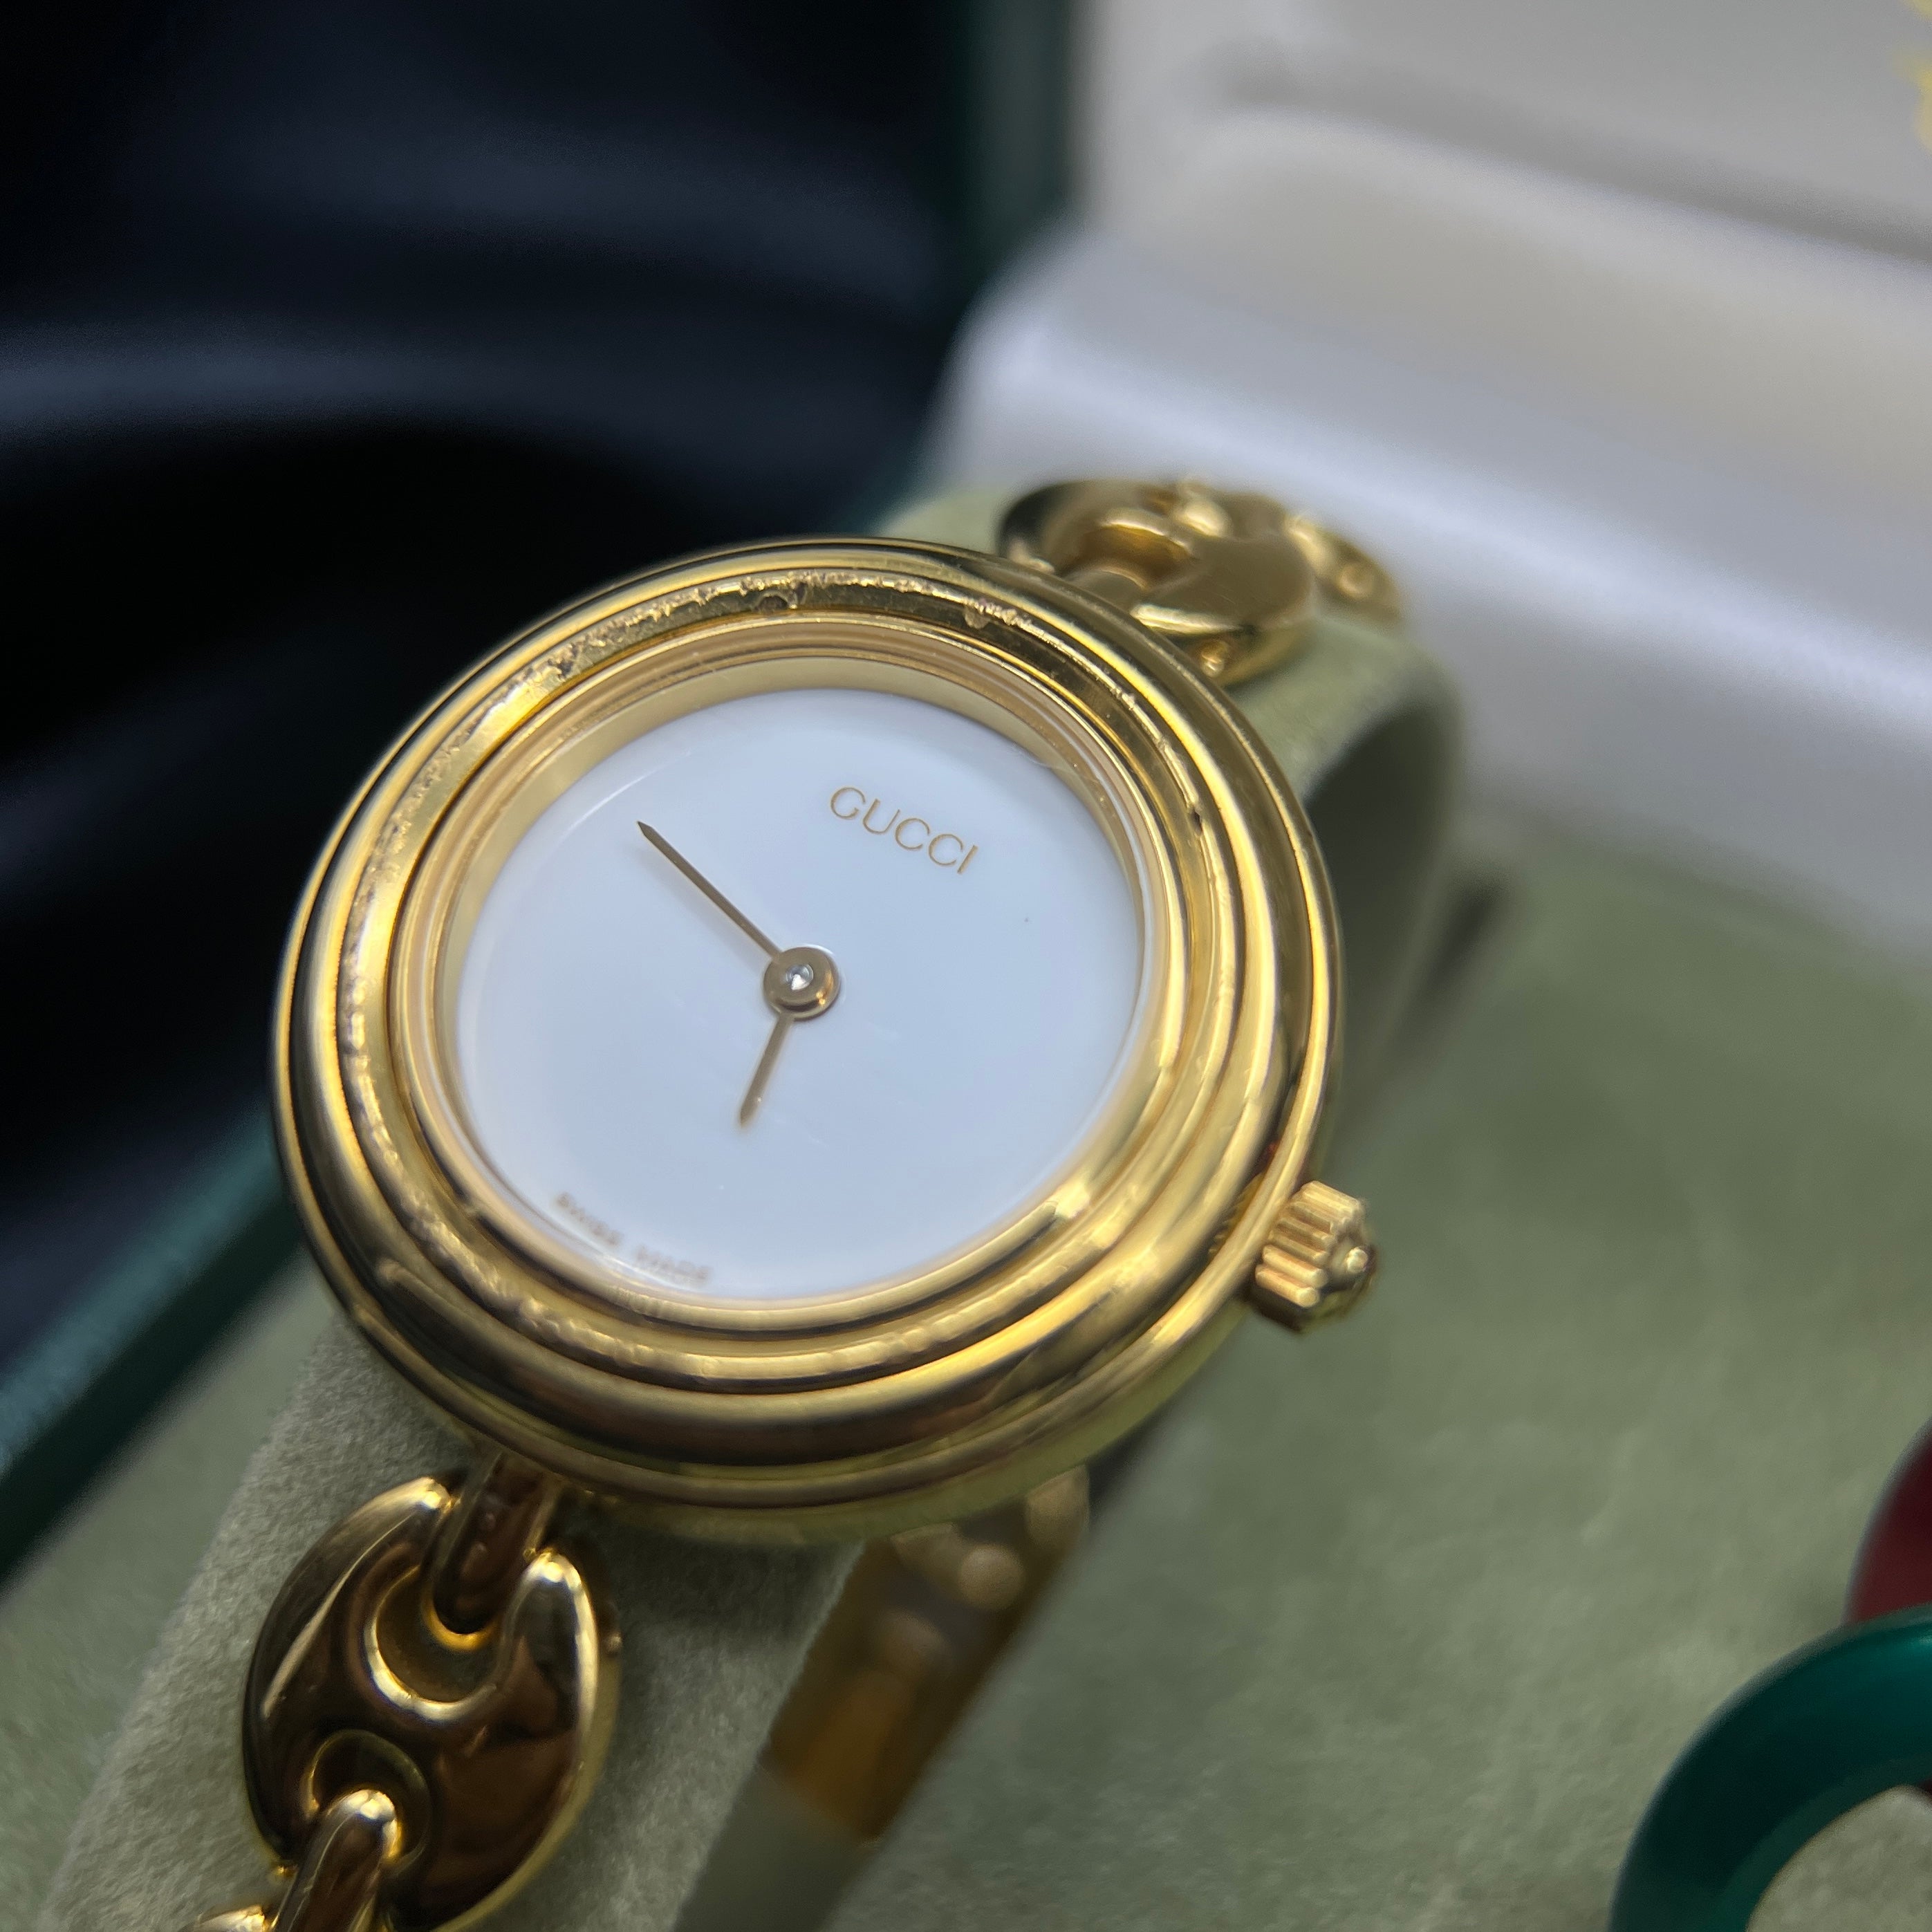 Gucci Gold Color Round Shape Watch With Changeable Bezel Length Of 